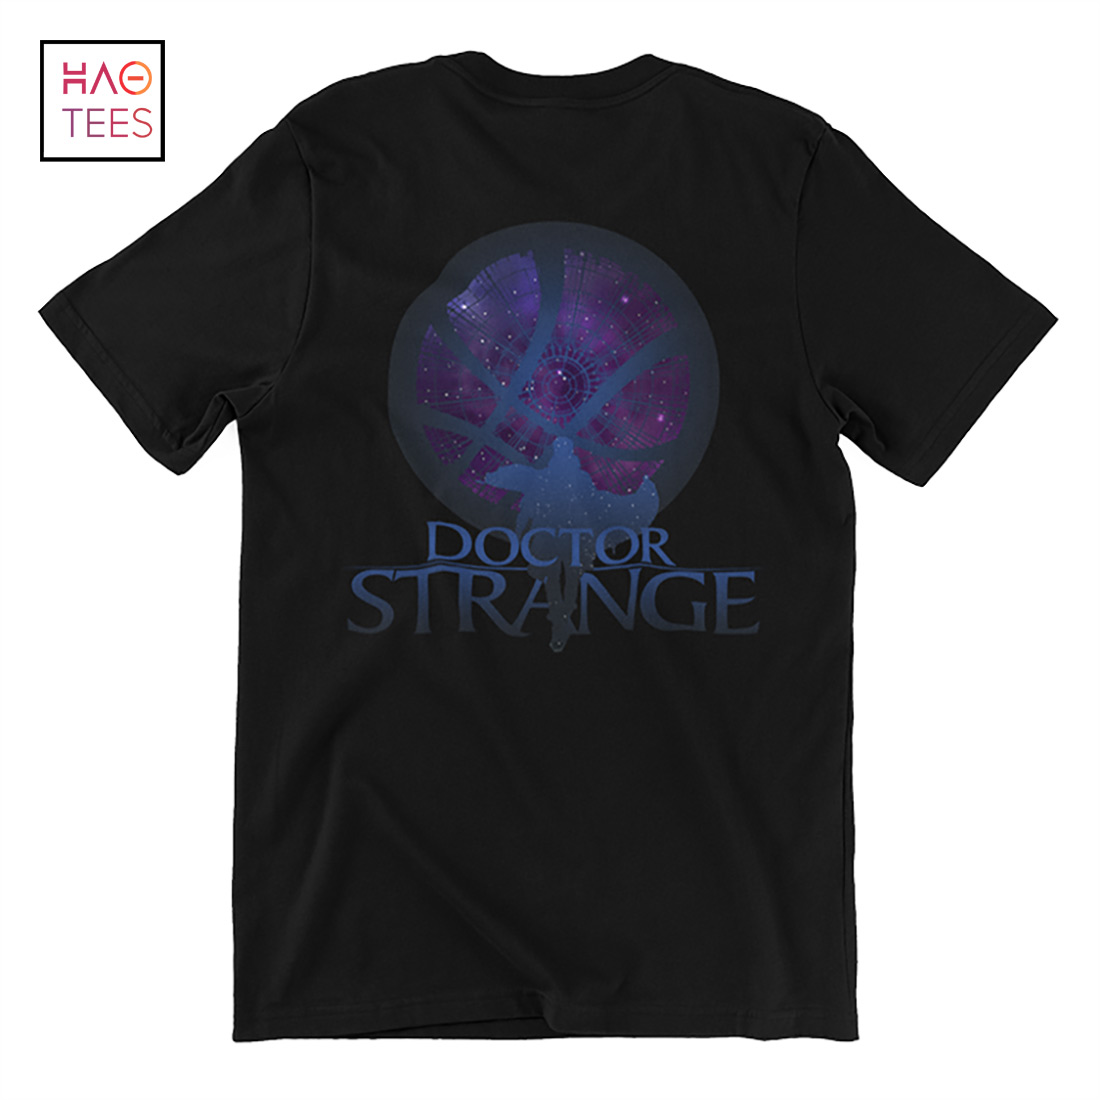 Protect the Wizard in Marvel's Infinity War with Dr. Strange T-shirt